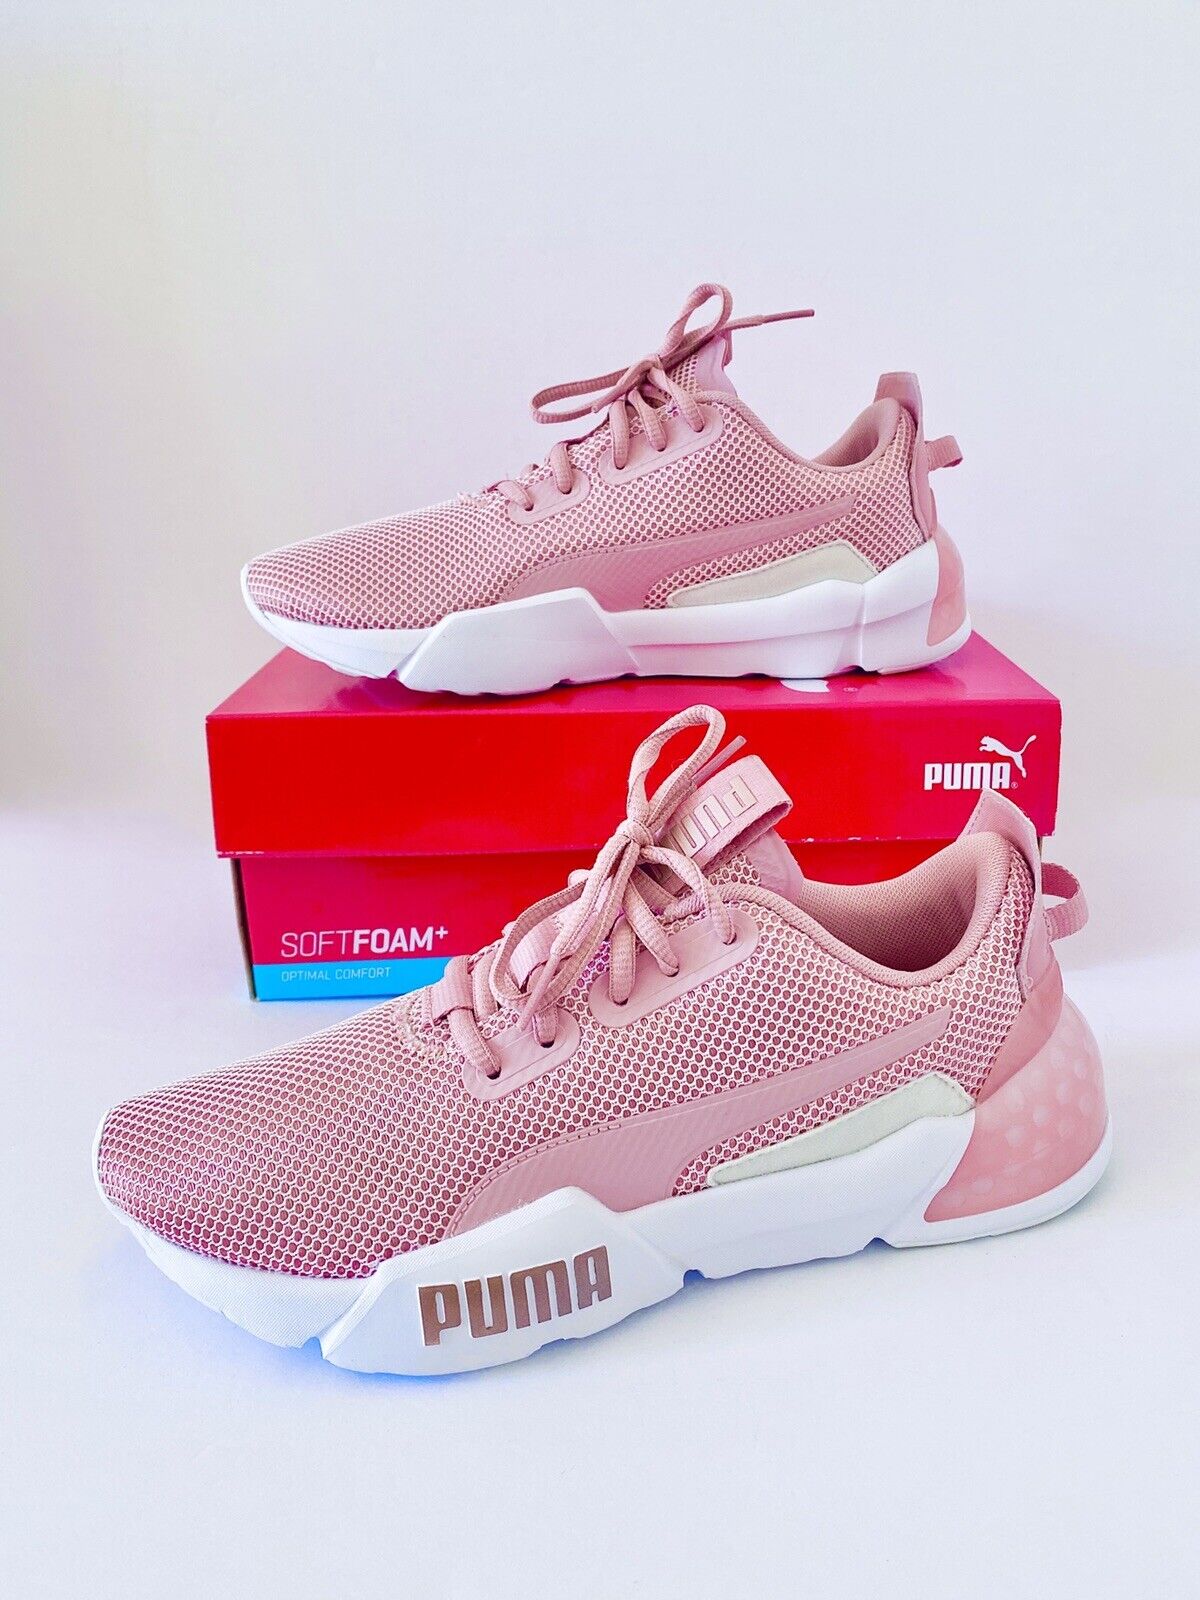 sitio dañar Muslo Puma Women's Cell Phase Gym Performance Trainers Running Shoes Sneakers  Pink Sz8 | eBay